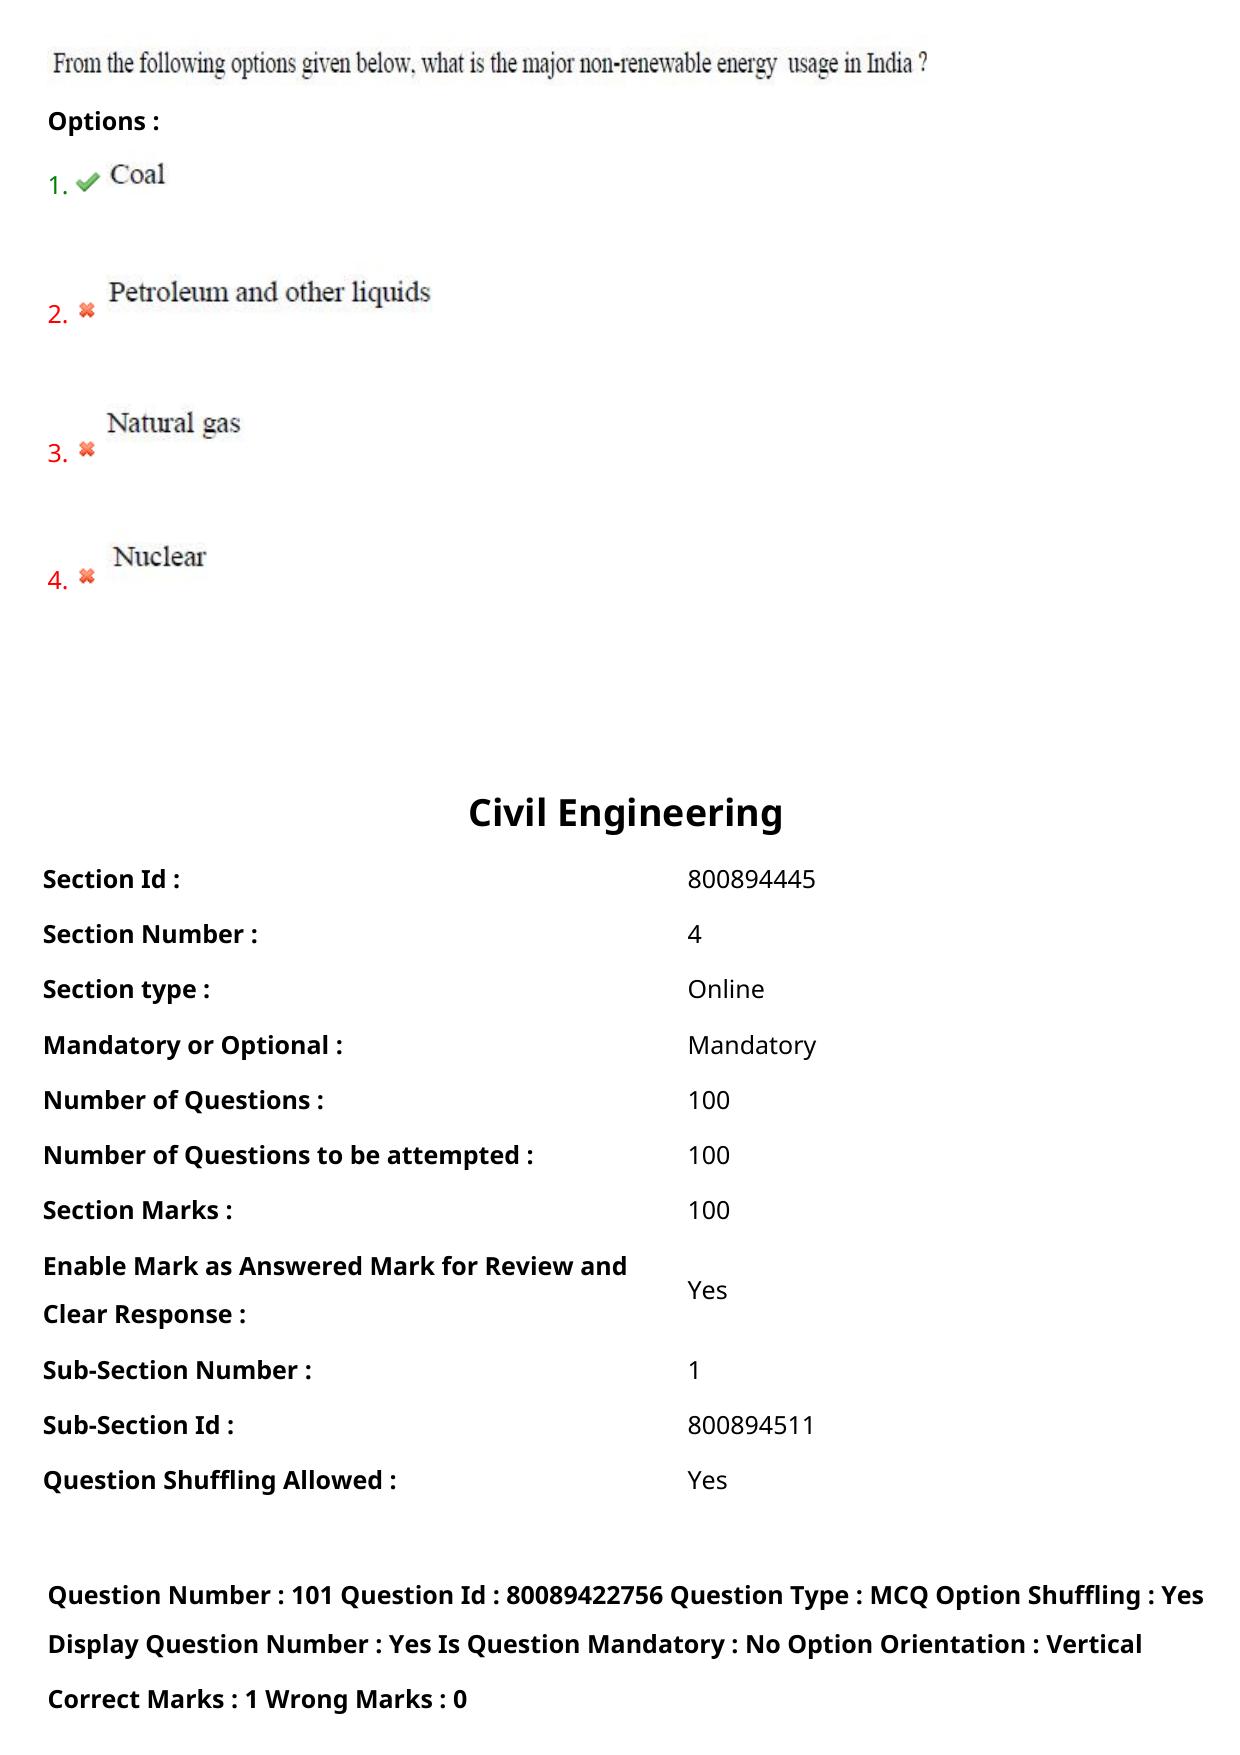 TS ECET 2021 Civil Engineering Question Paper - Page 56